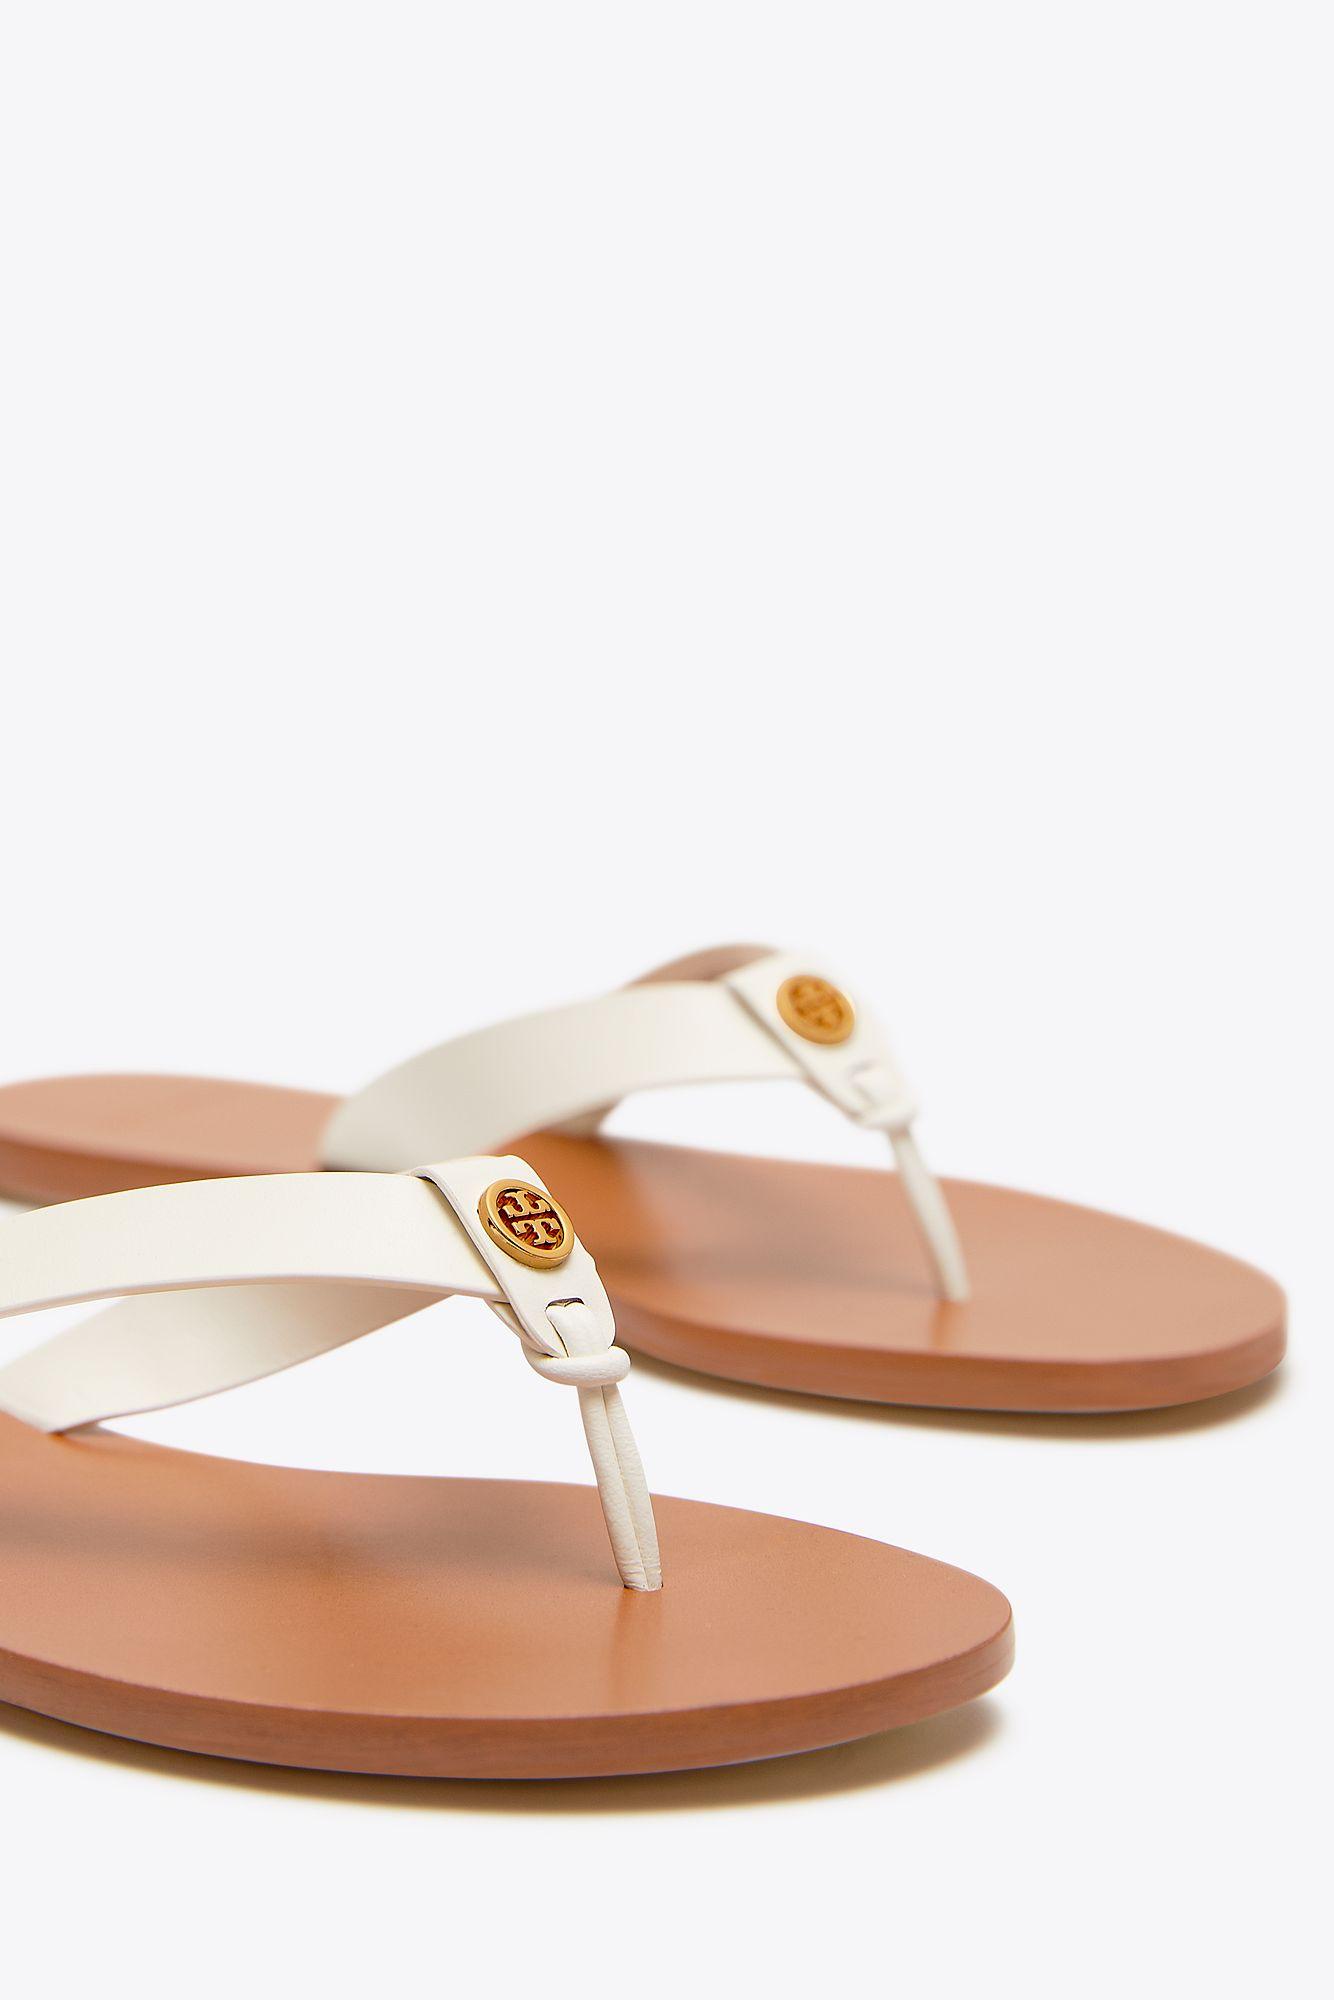 tory burch ivory sandals